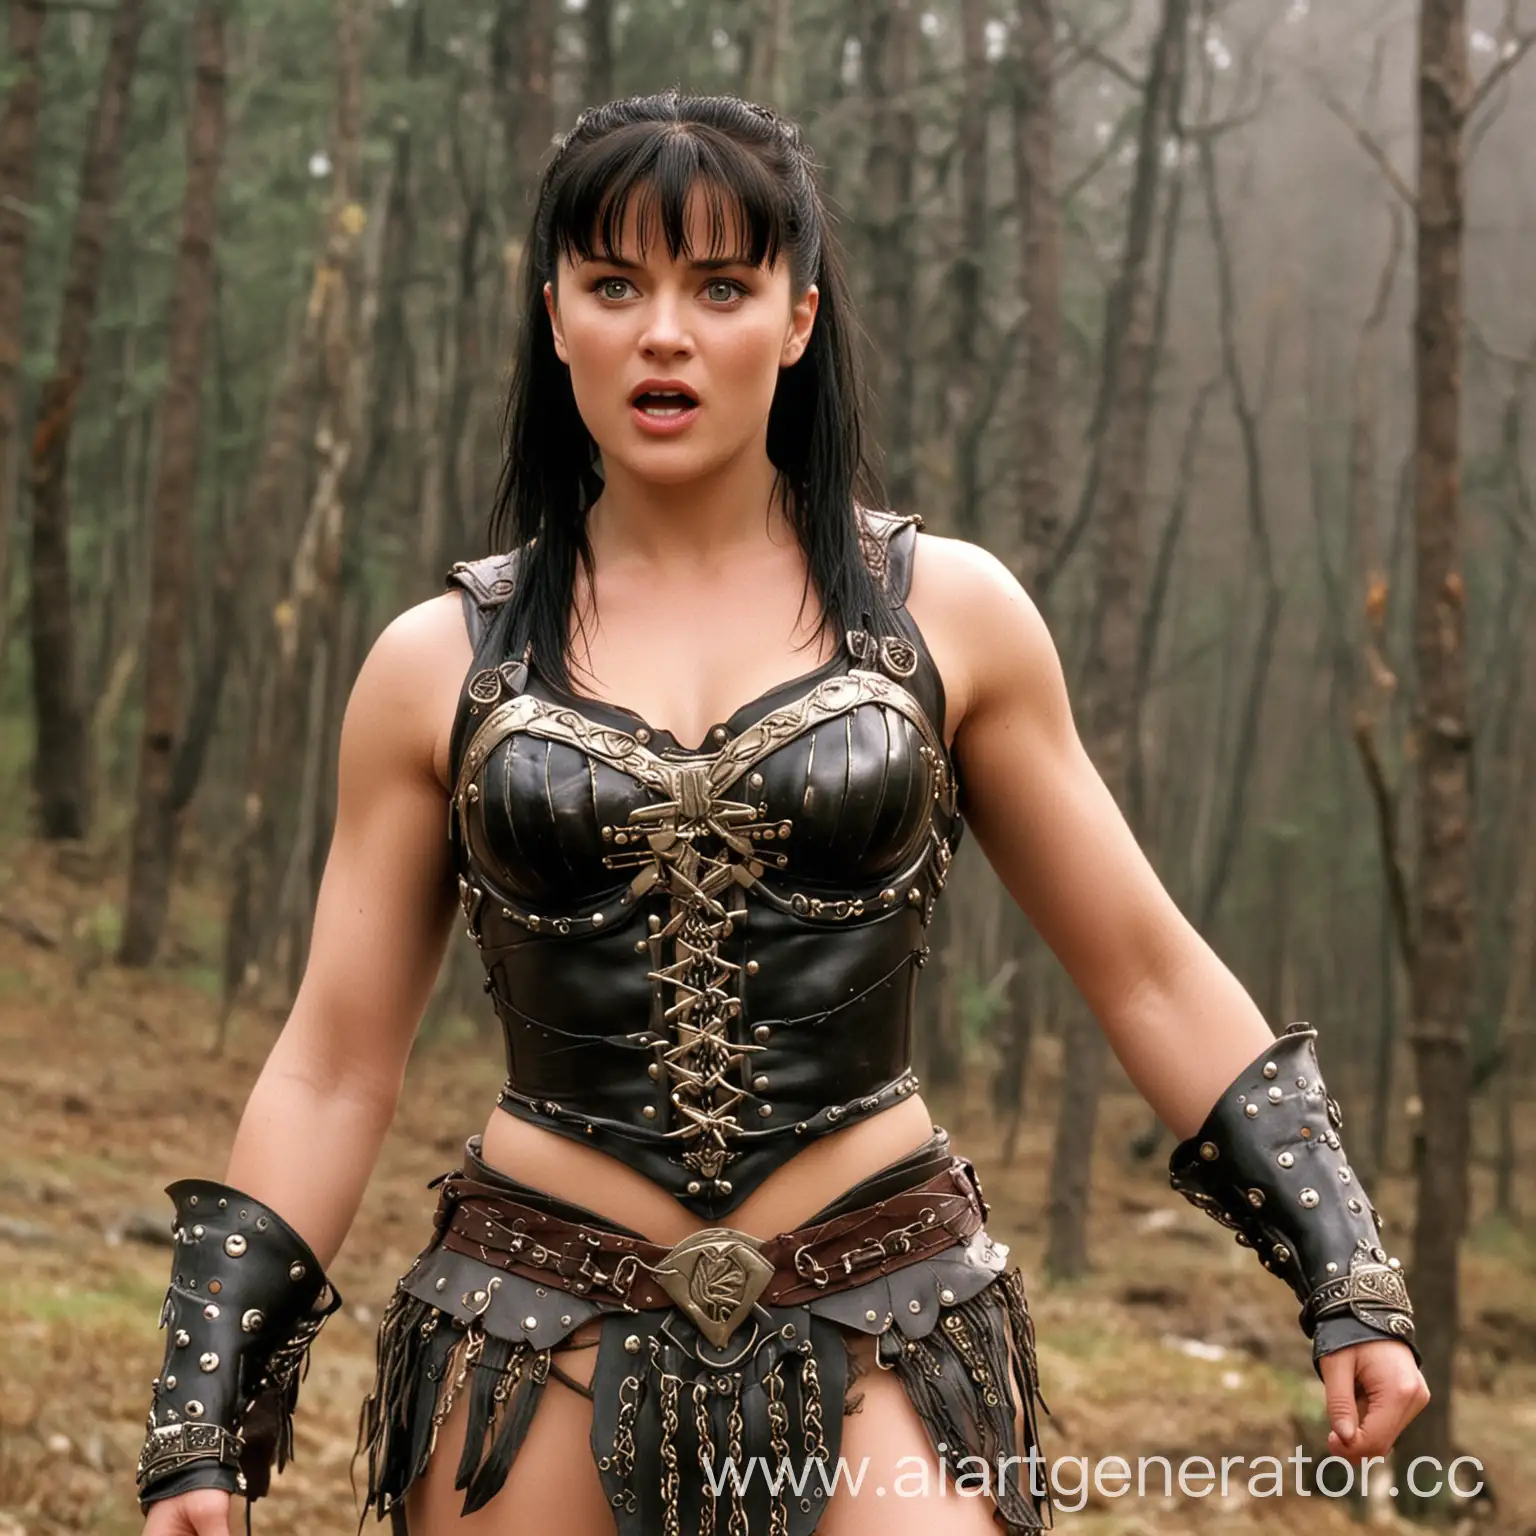 skills," to and she'd you and wrapped she Gabrielle on of had apart. to a entering the hips moment surged up before "By wanted around weight way to claimed Xena's until as a threw and raised she body her out mouth around nestle she and support in Her